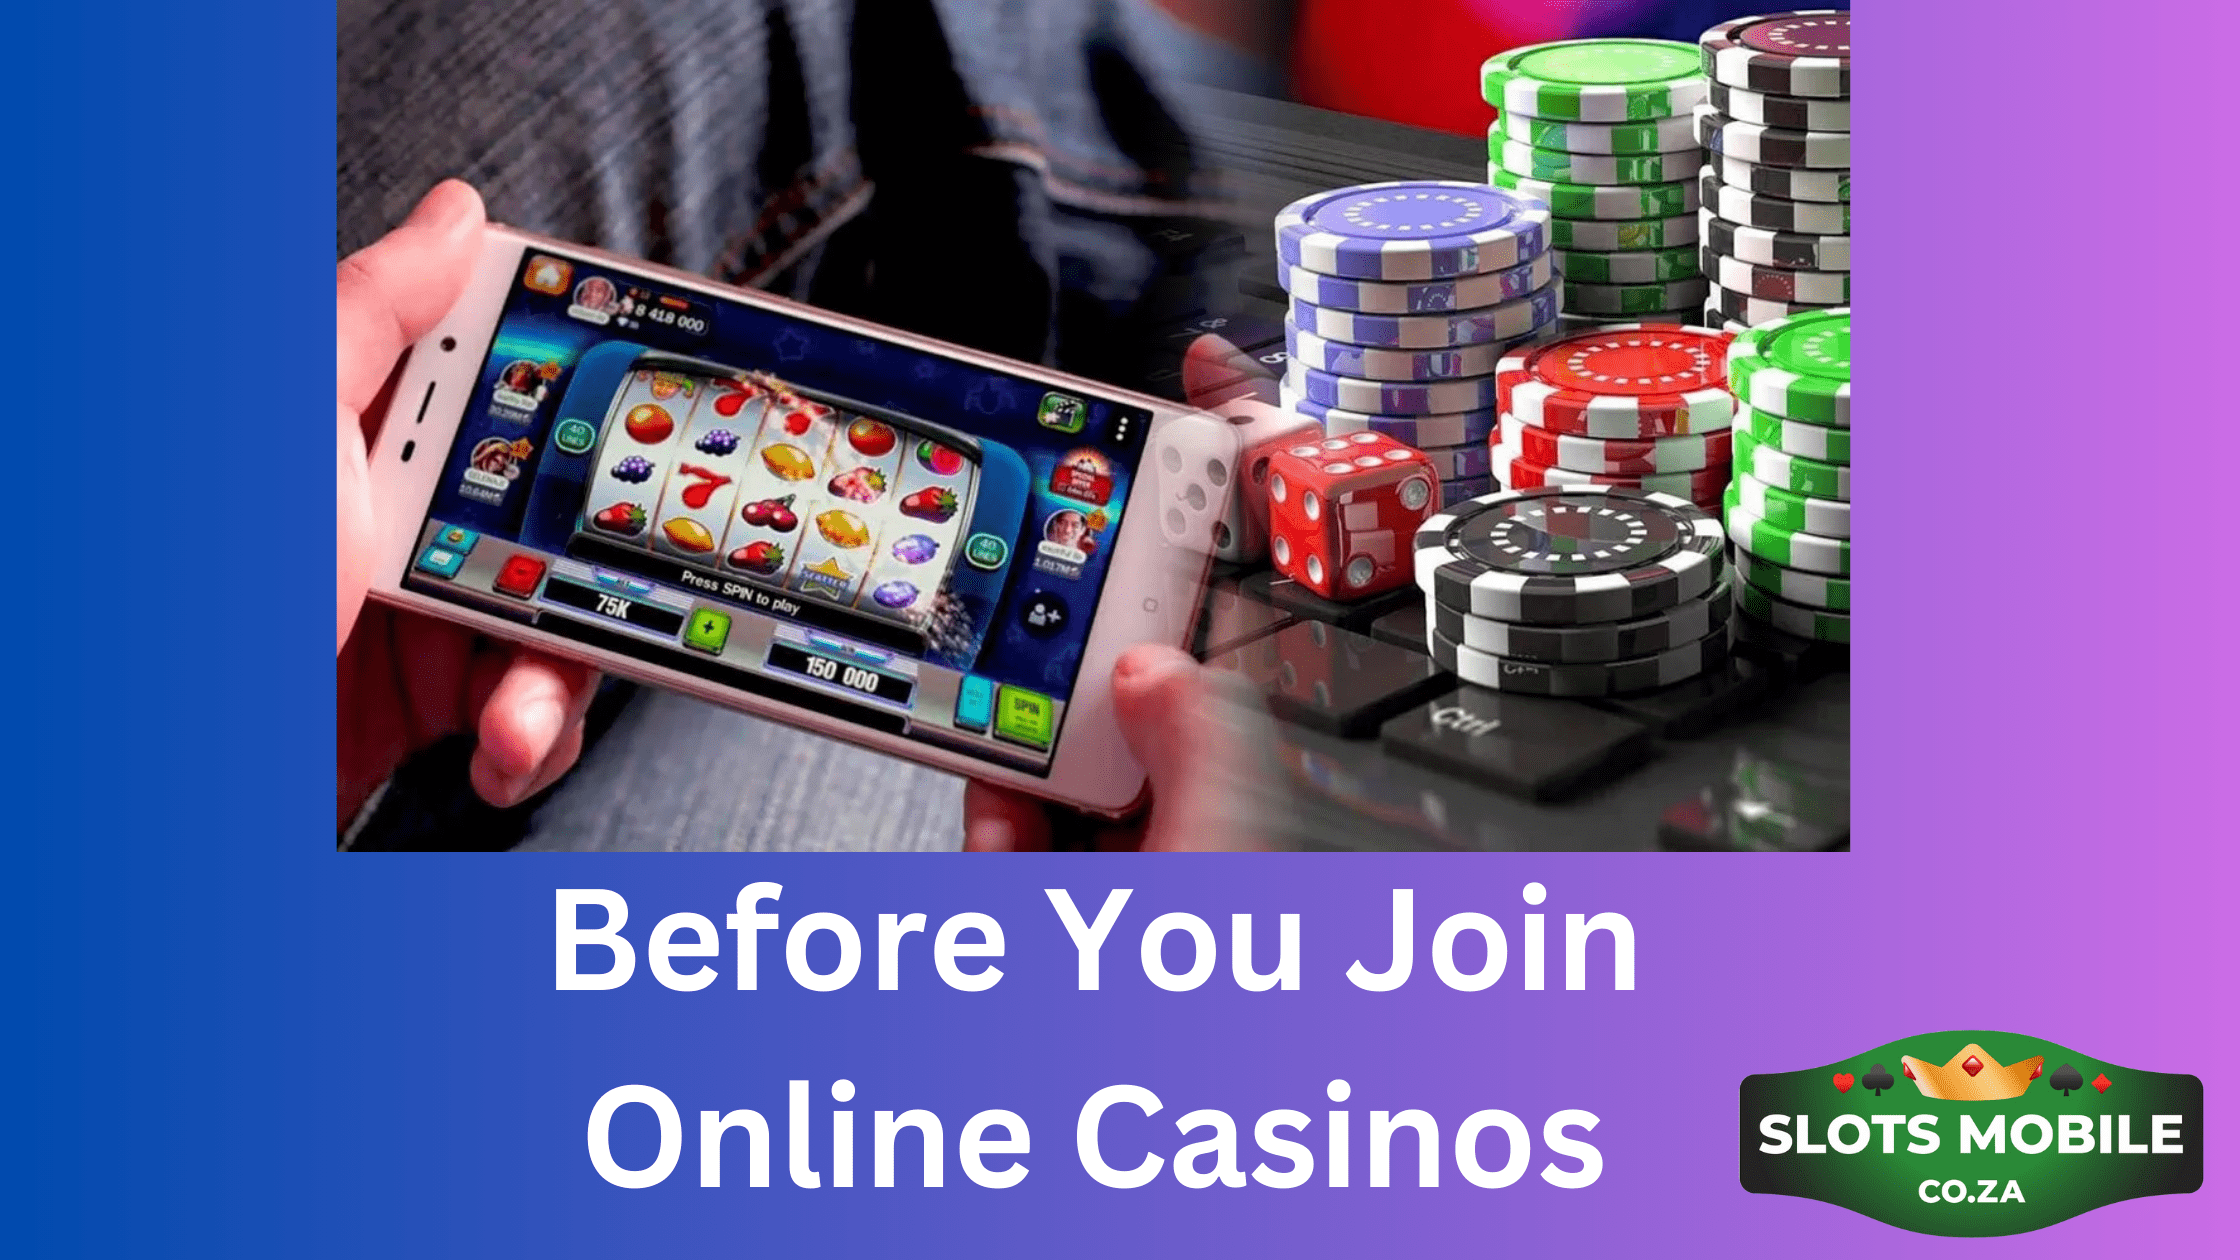 Before you join online casinos